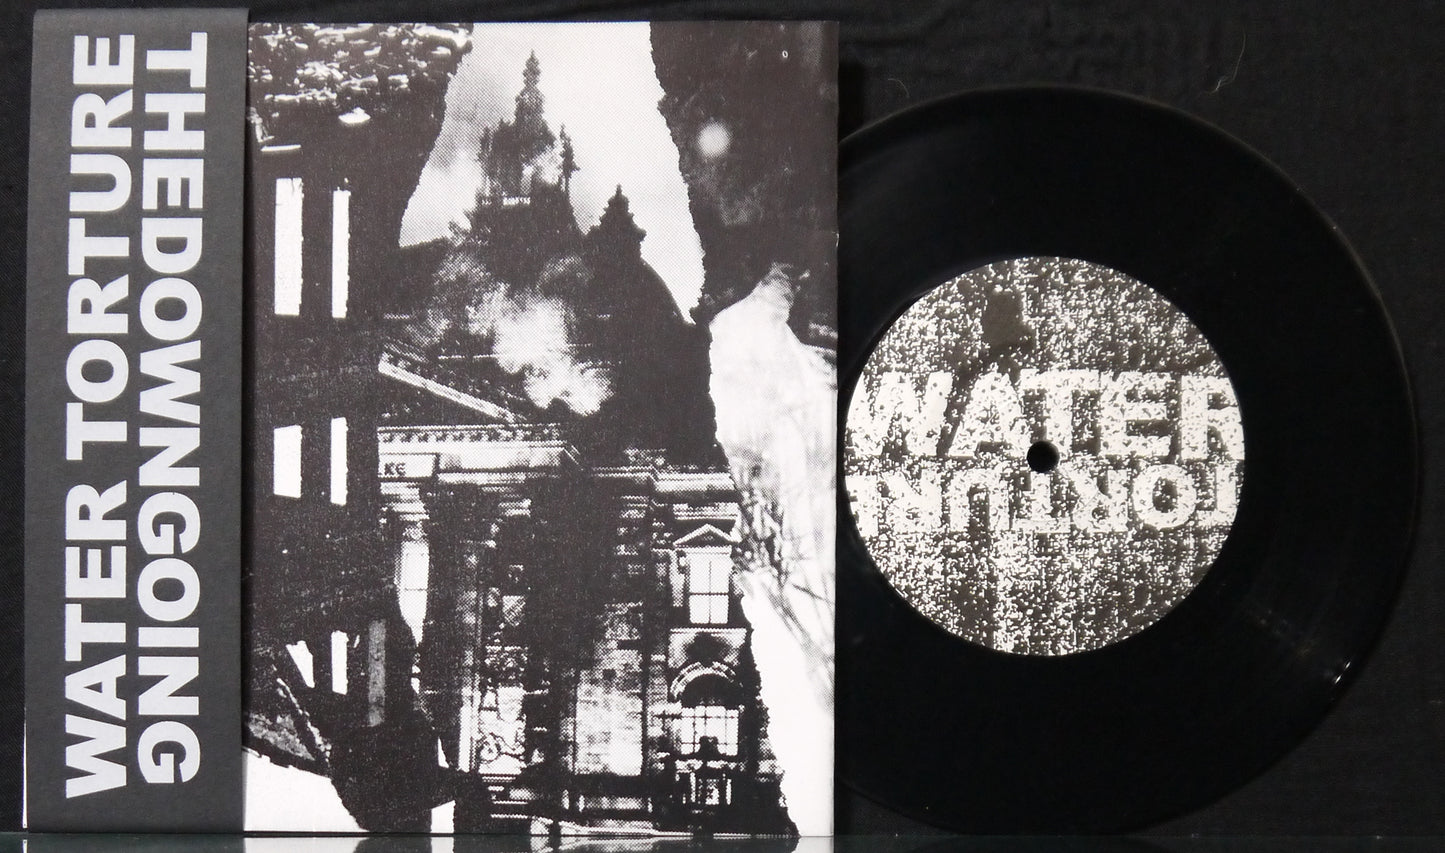 WATER TORTURE / THEDOWNGOING - Split 7"